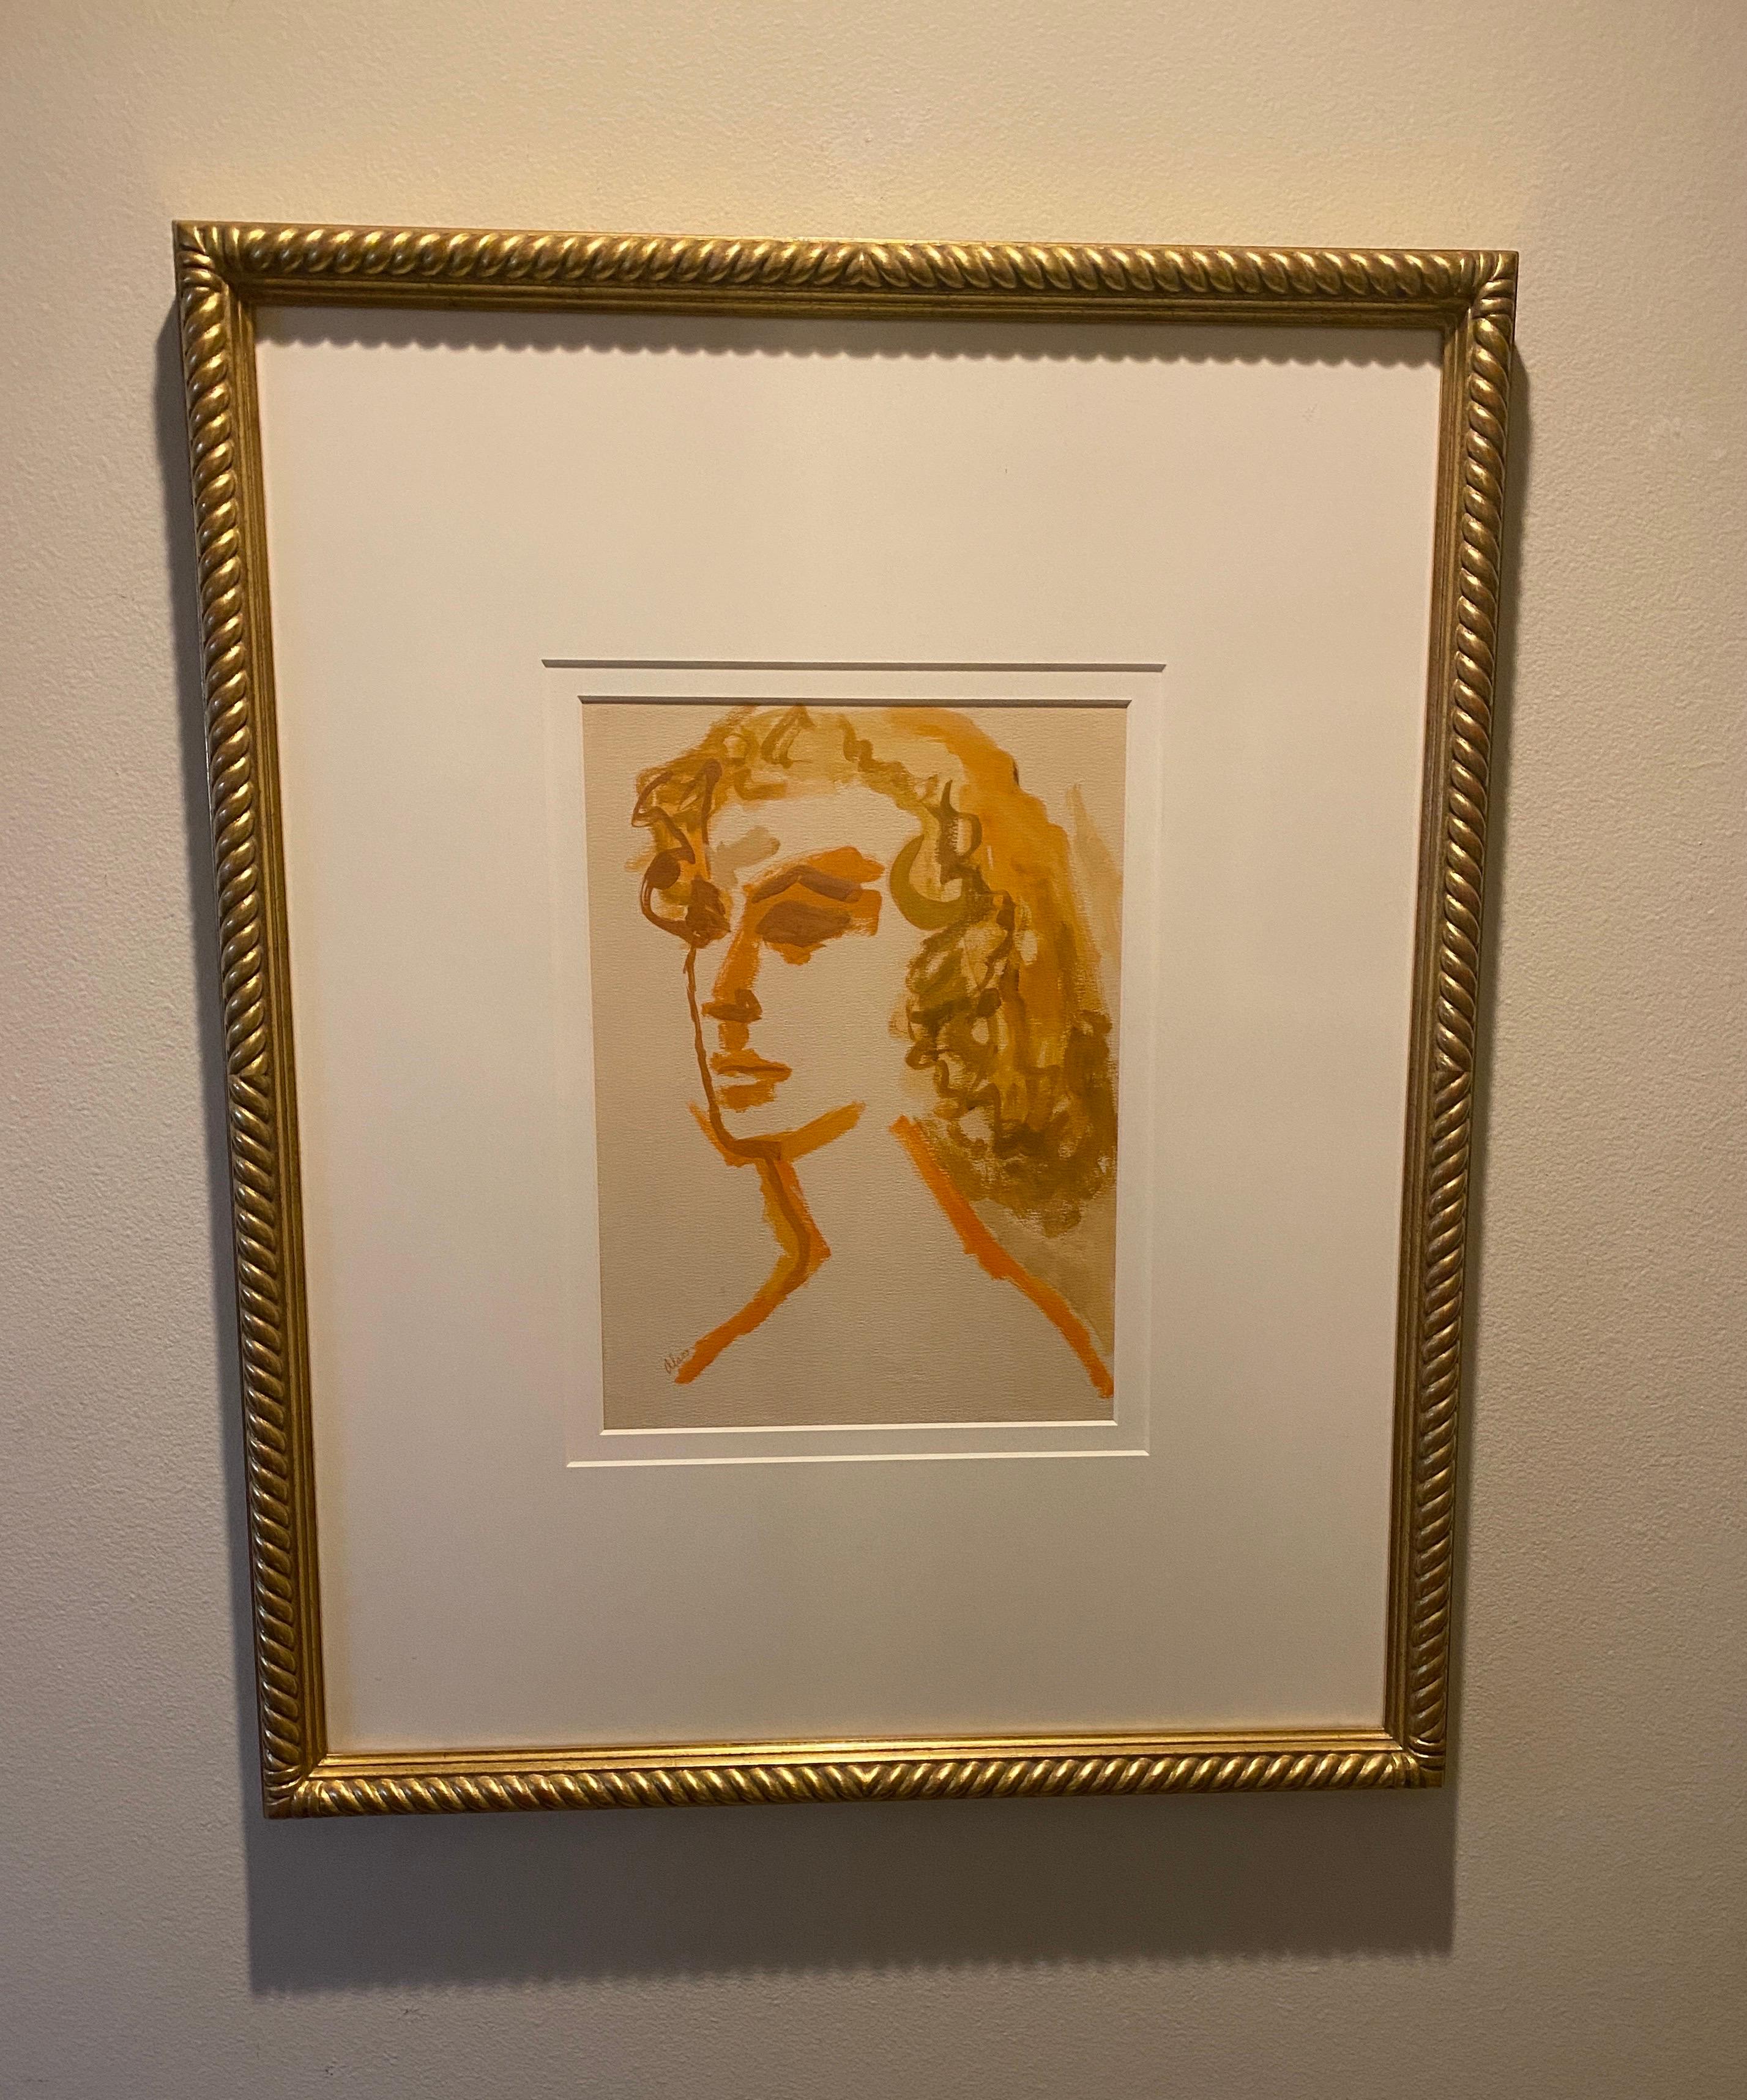 Modern Portrait of a Woman Large Original Painting Gold Leaf Frame Orange Tones In Good Condition For Sale In Palm Springs, CA